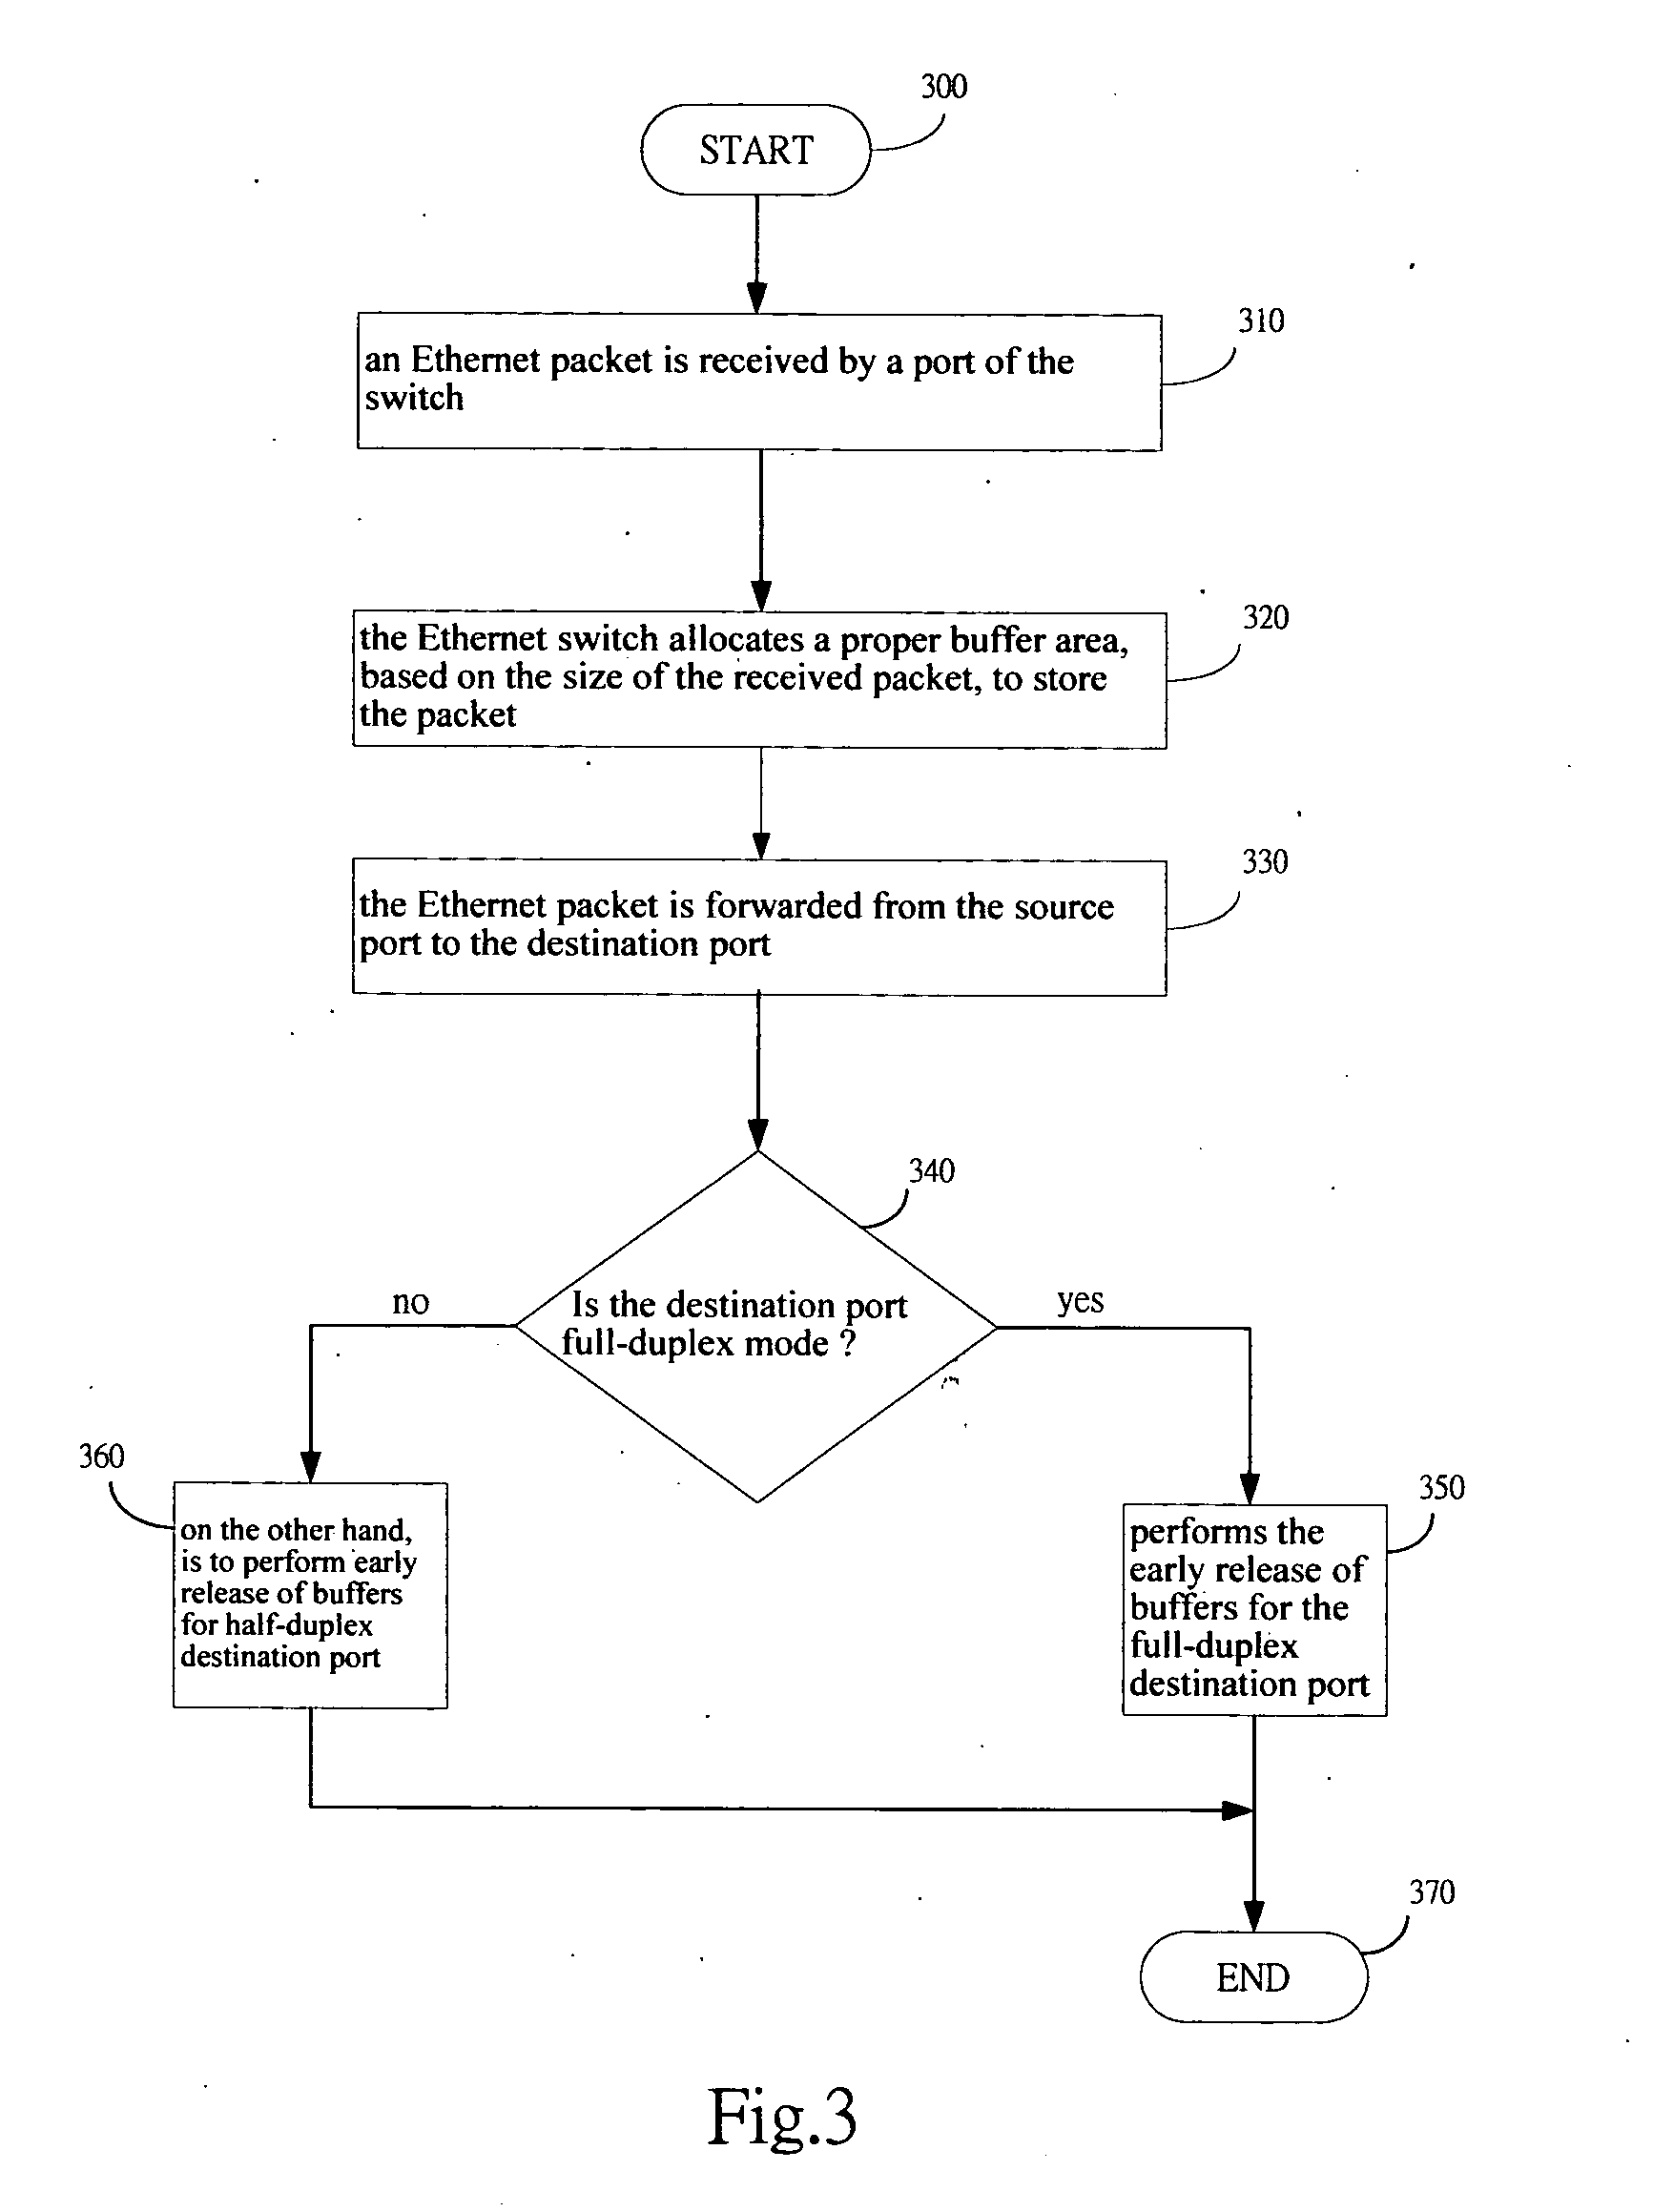 Method of early buffer release and associated MAC controller